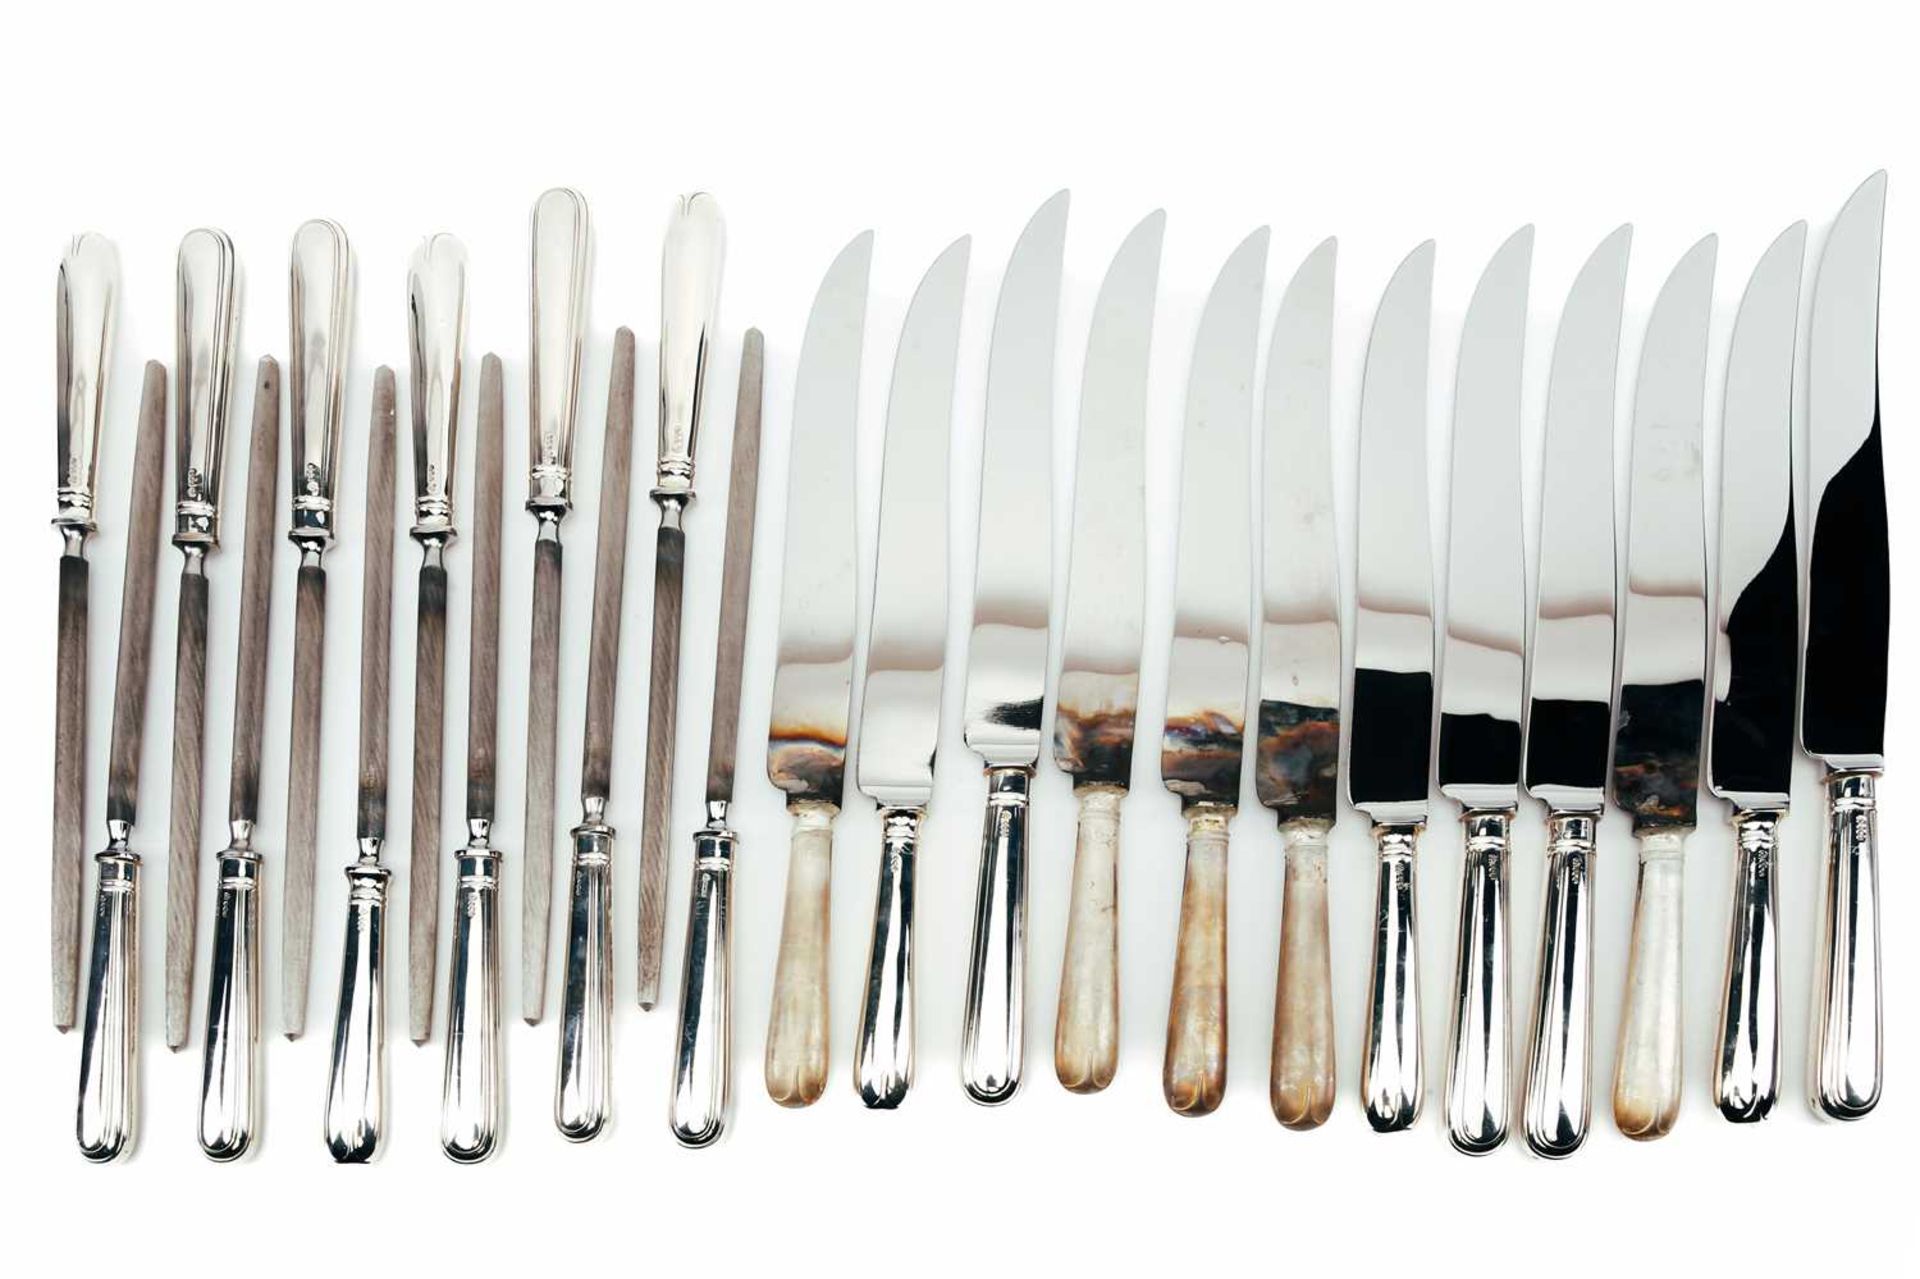 A mixed collection of modern silver-handled carving knives and silver-handled sharpening steels